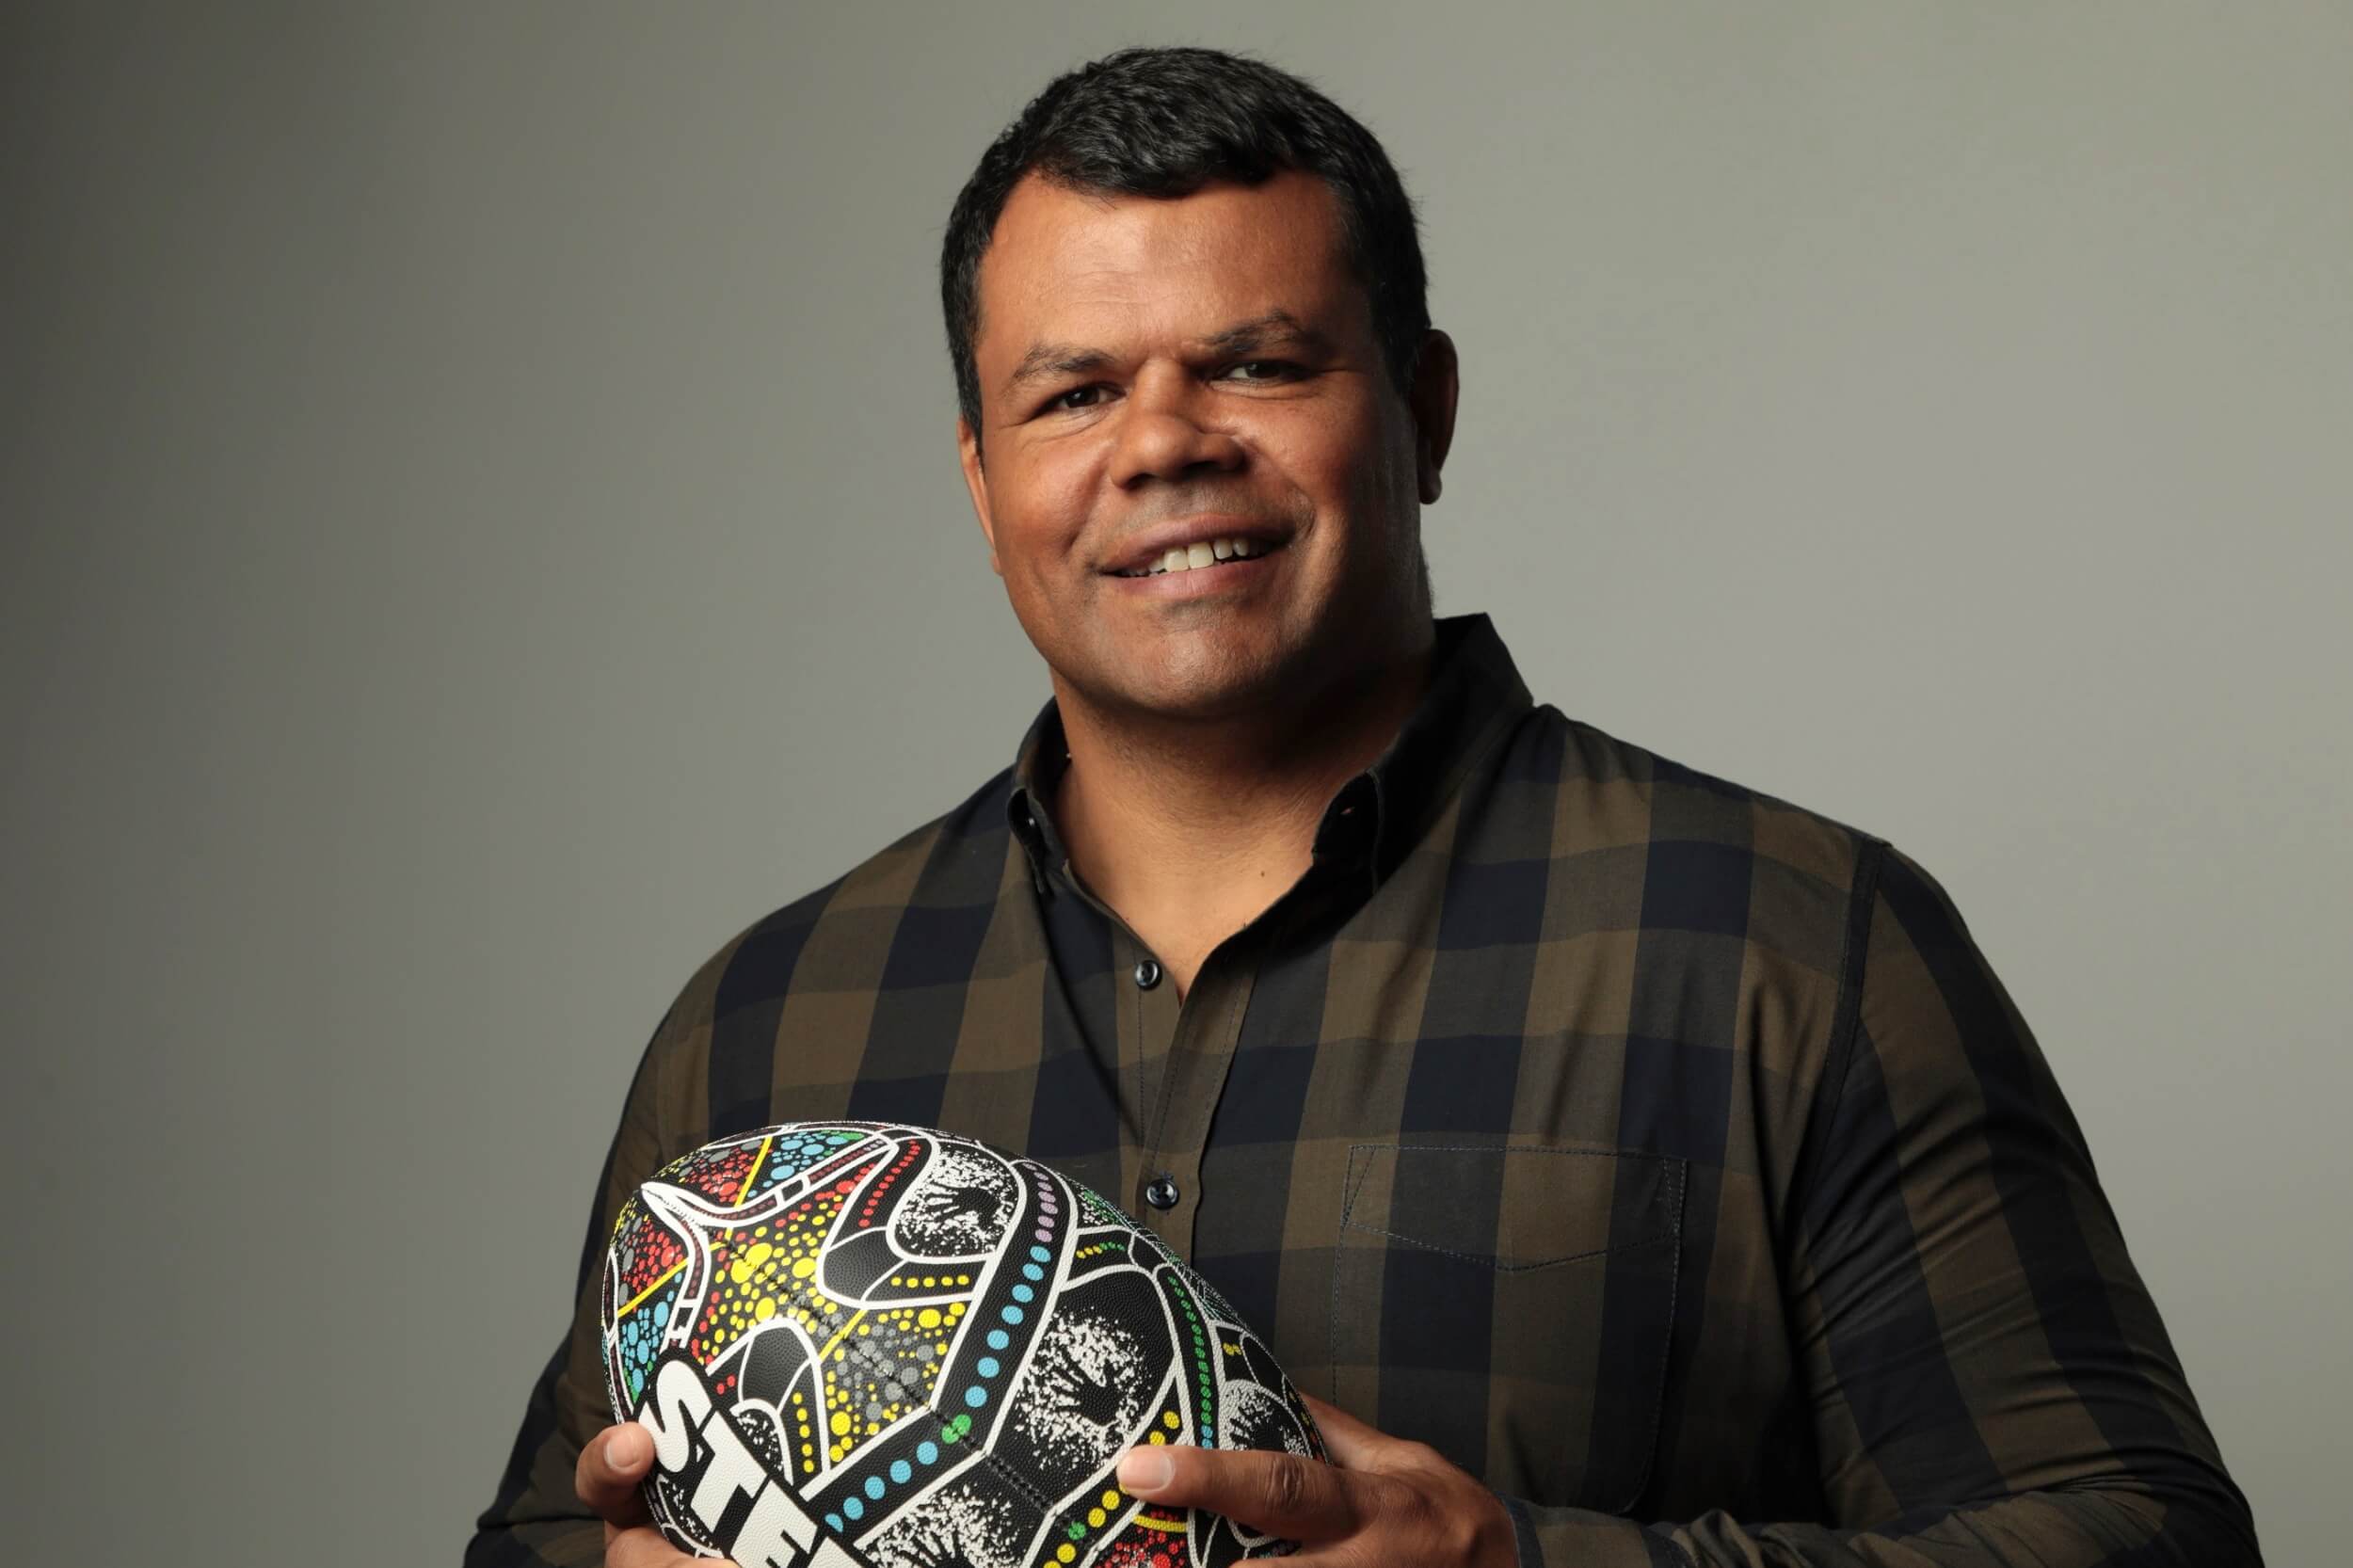 NITV’s flagship footy show Over the Black Dot returns Tuesday 5 March, live and in high definition